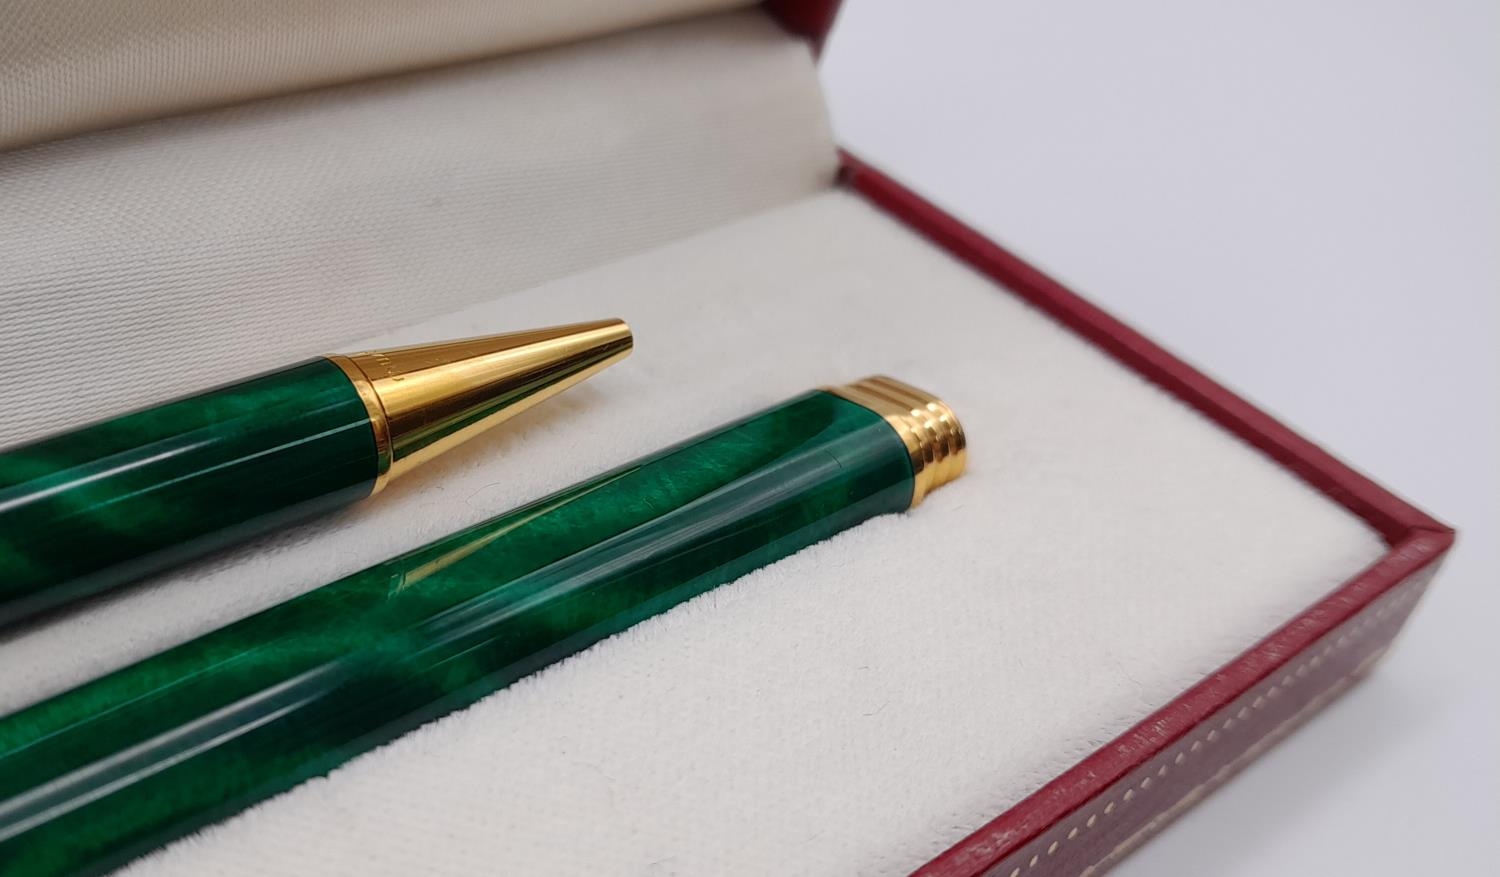 A Must de Cartier Fountain and Ballpoint Set of Pens. Malachite lacquer decoration. Ref: 017182 - Image 3 of 9